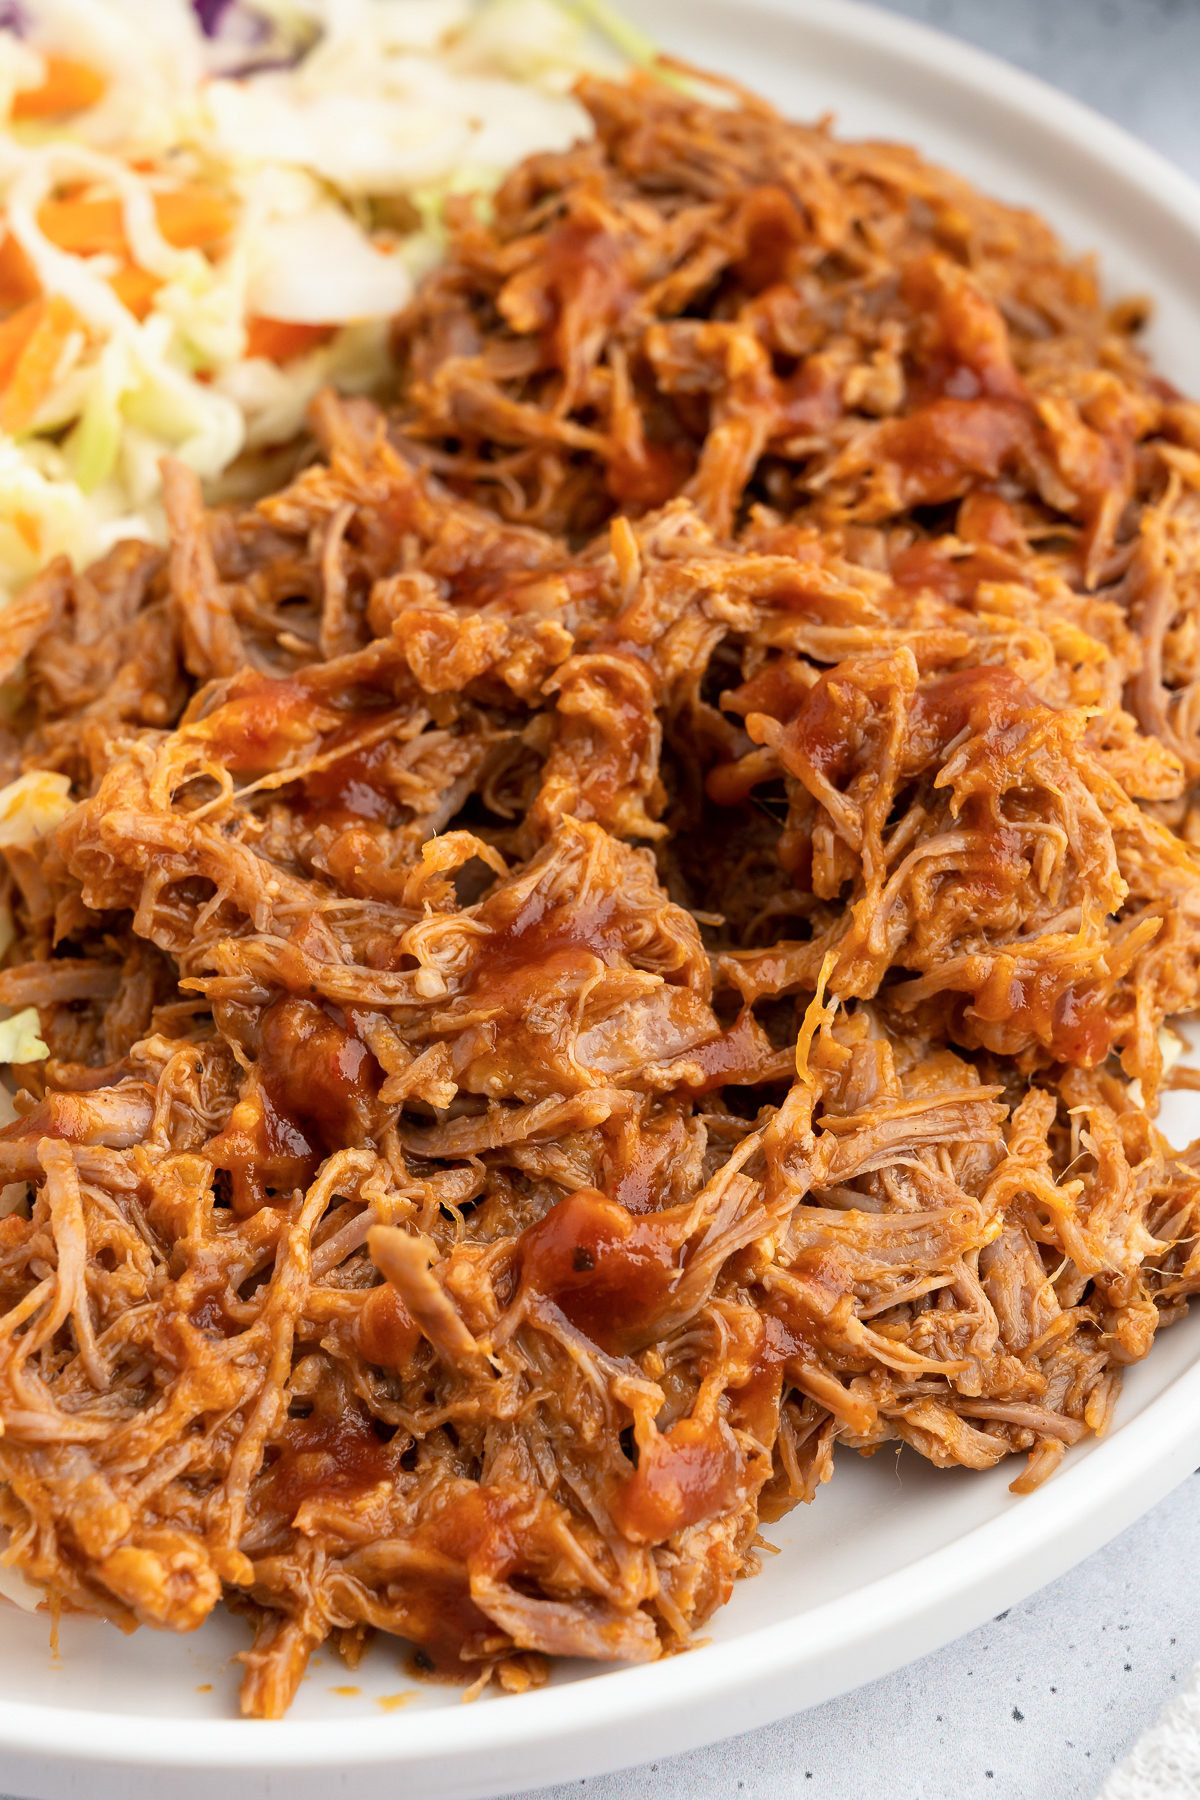 Half of a dinner plate is filled with shredded pulled pork. The other half is out of focus coleslaw.